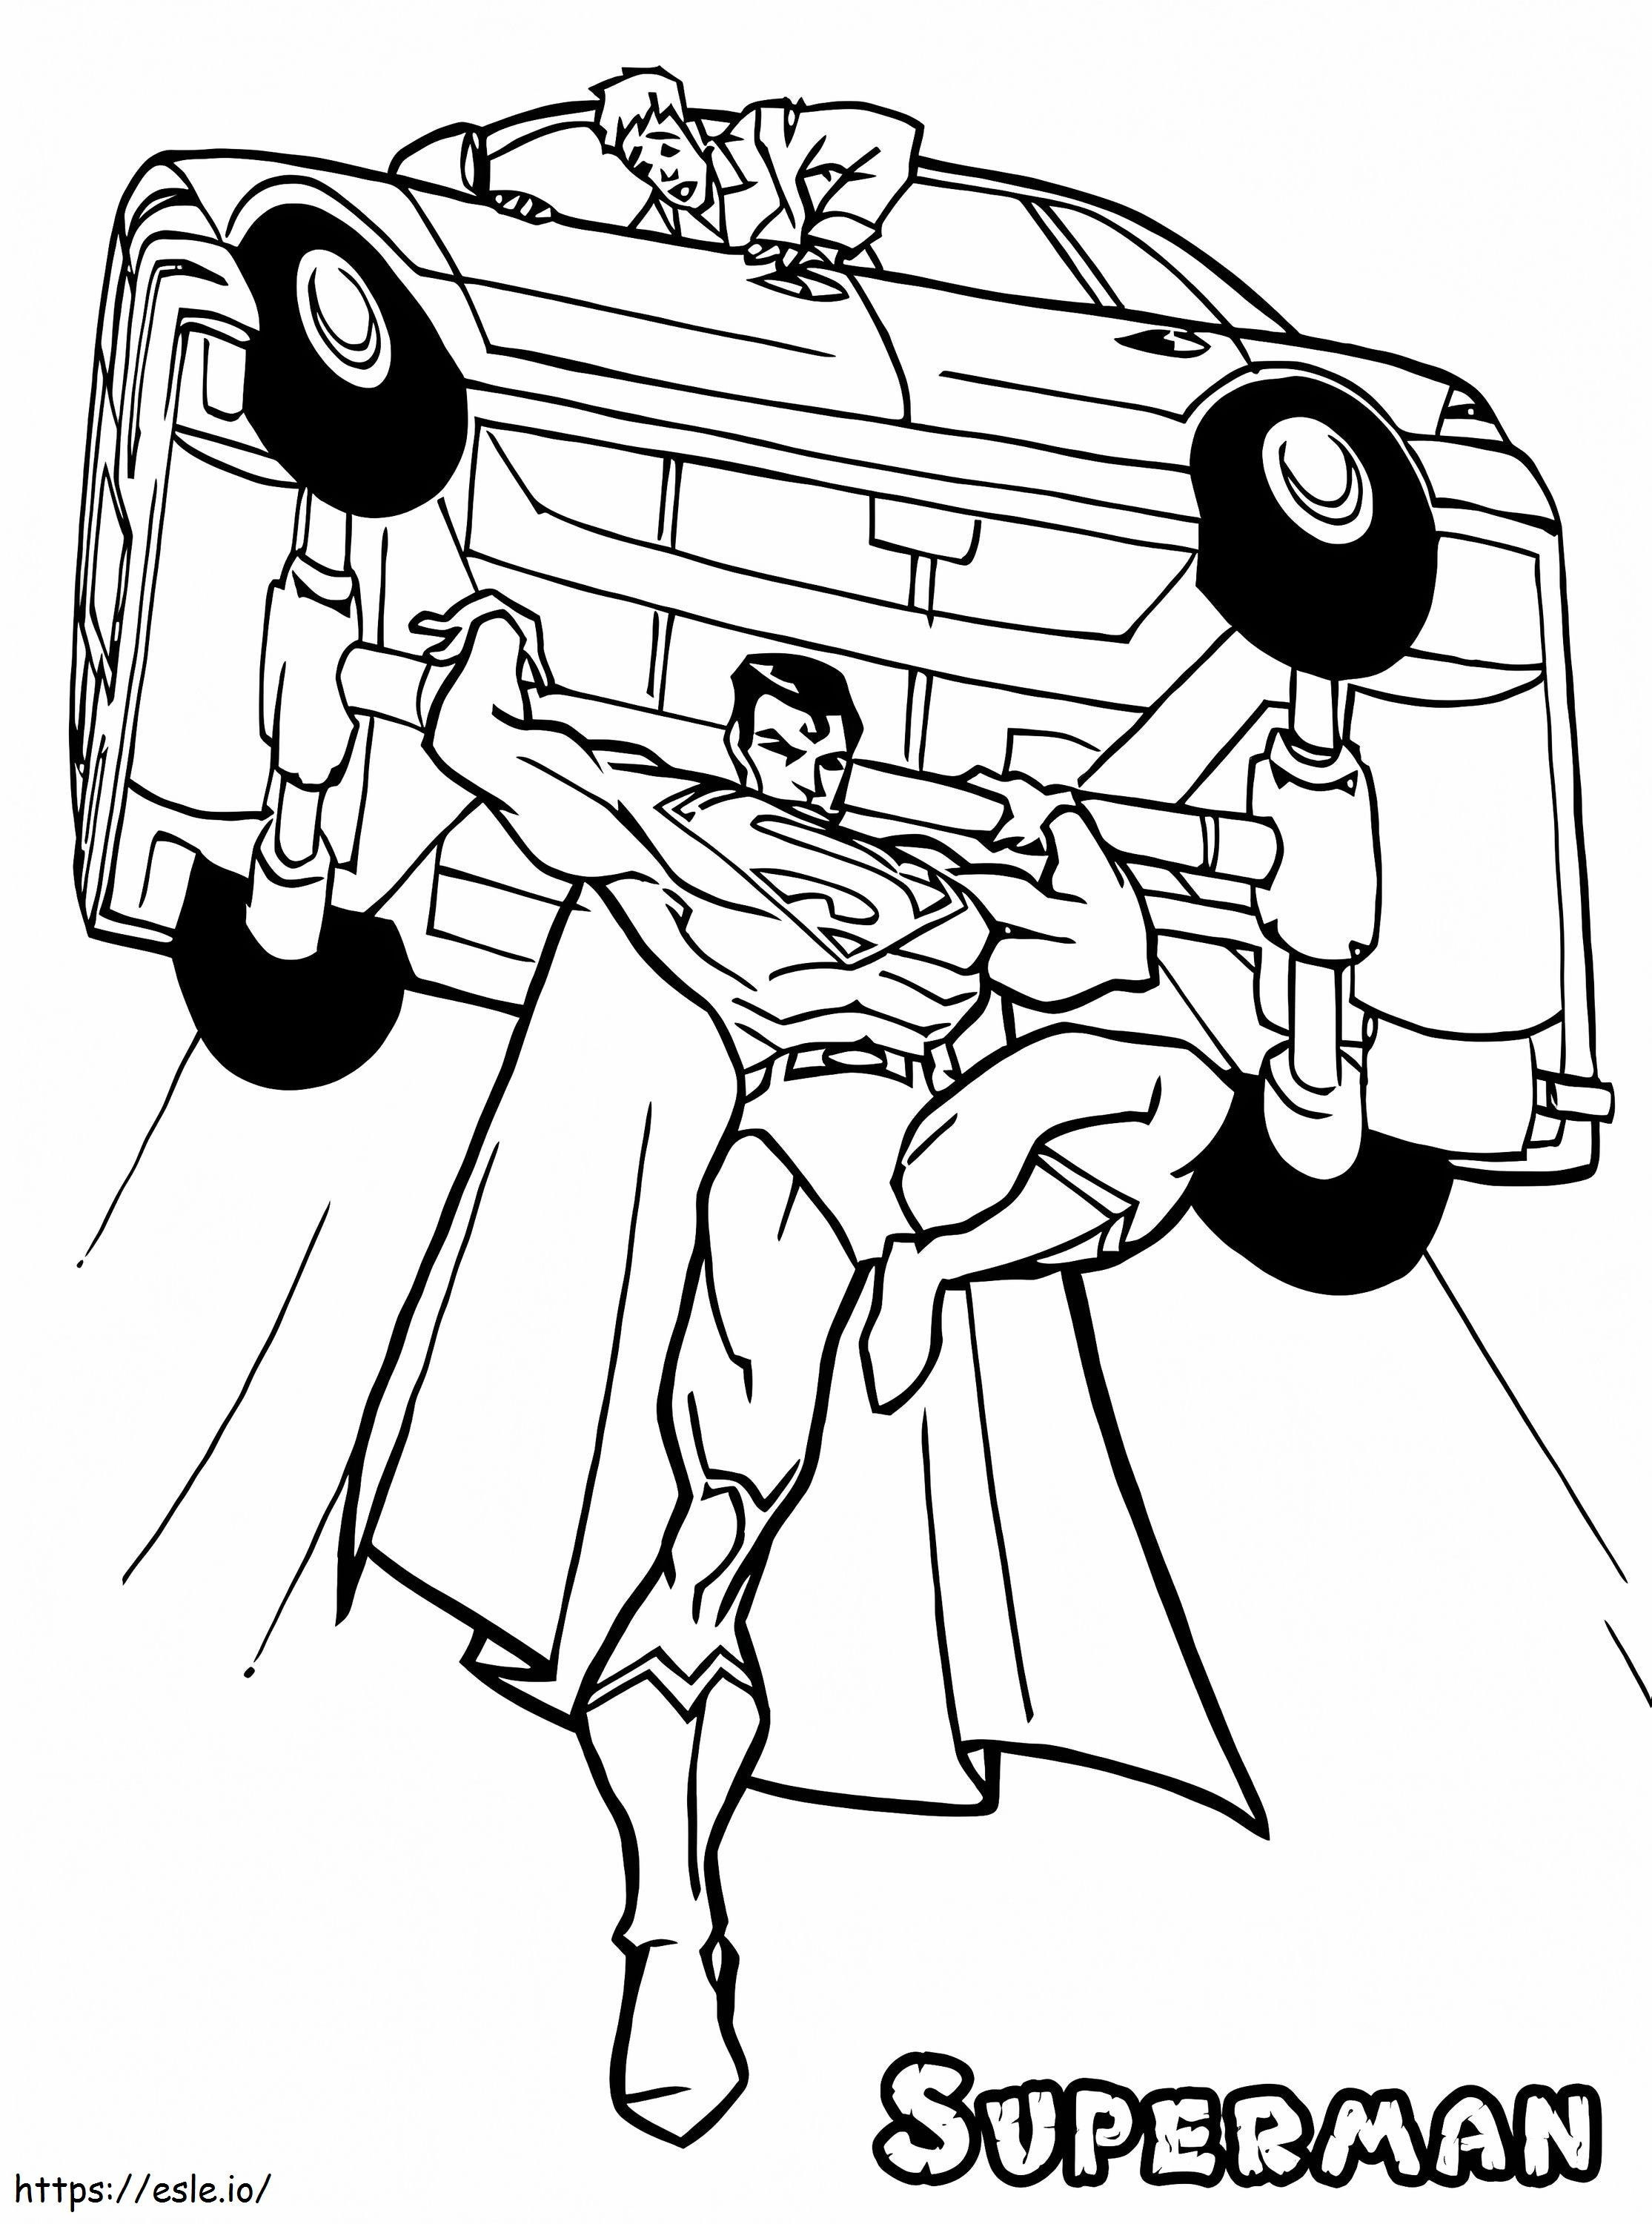 Superman Holding A Car coloring page